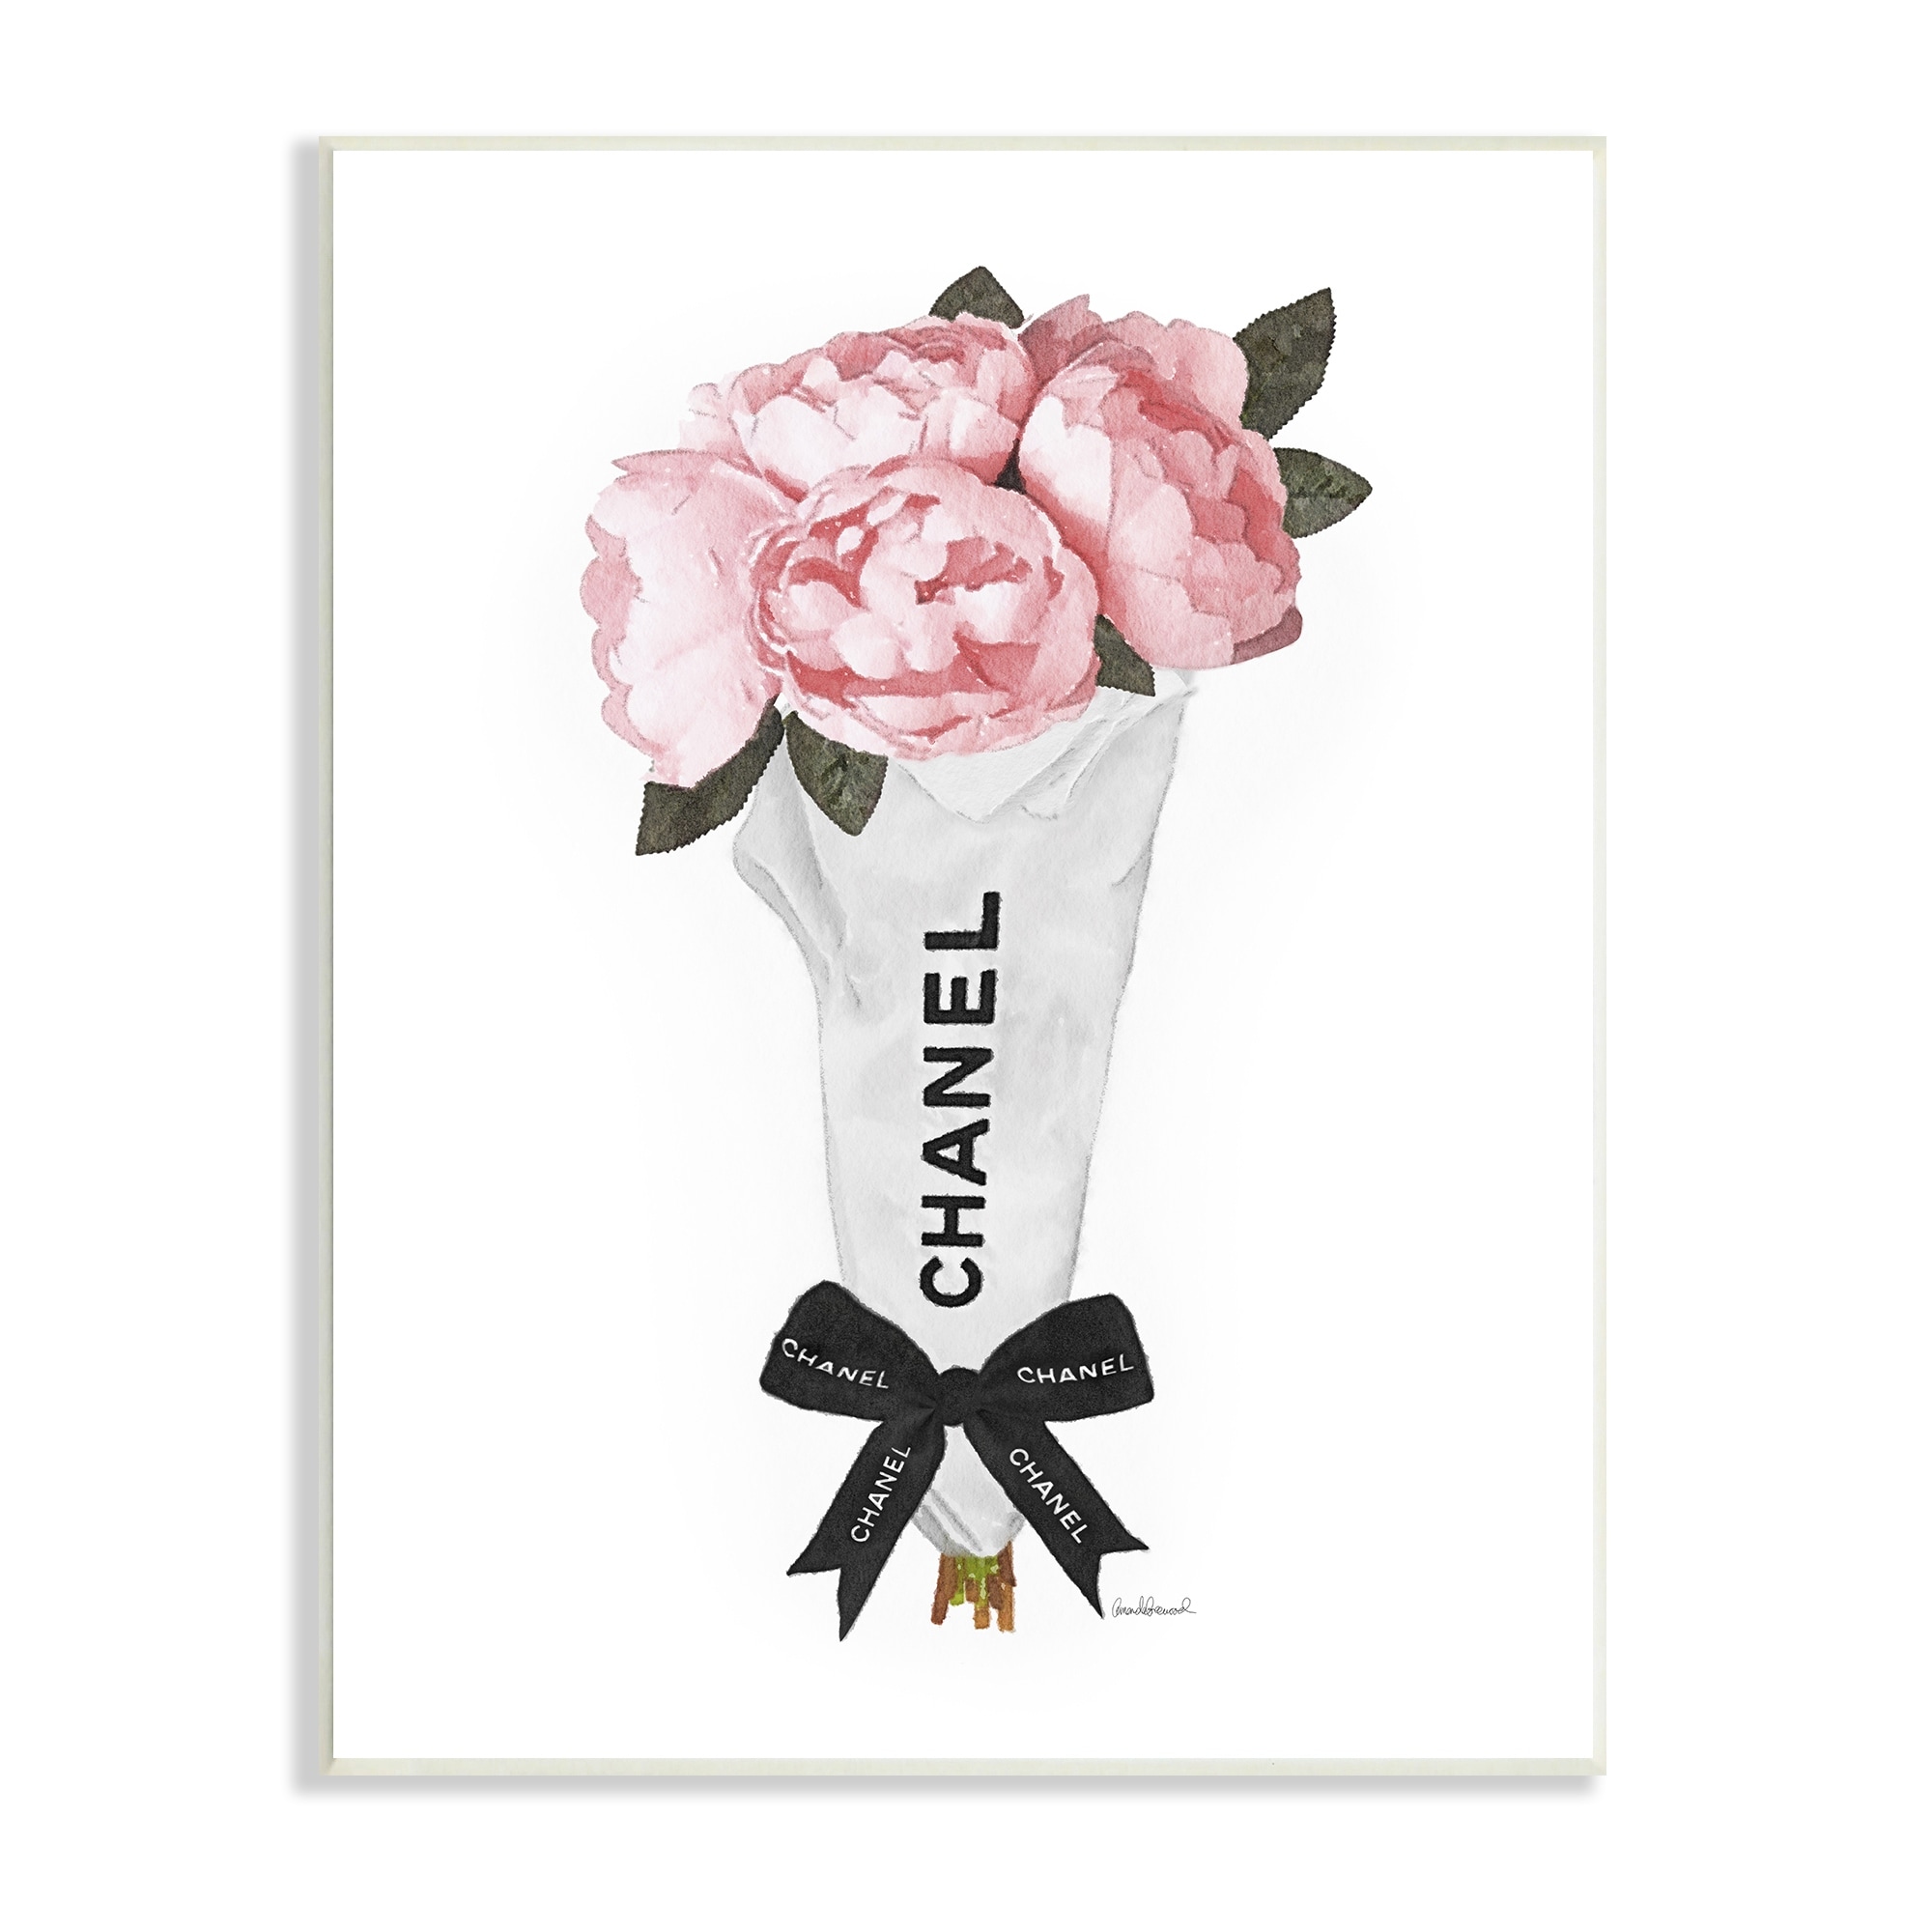 CHANEL No 5, glass vase, CHANEL, peonies, roses, shabby chic